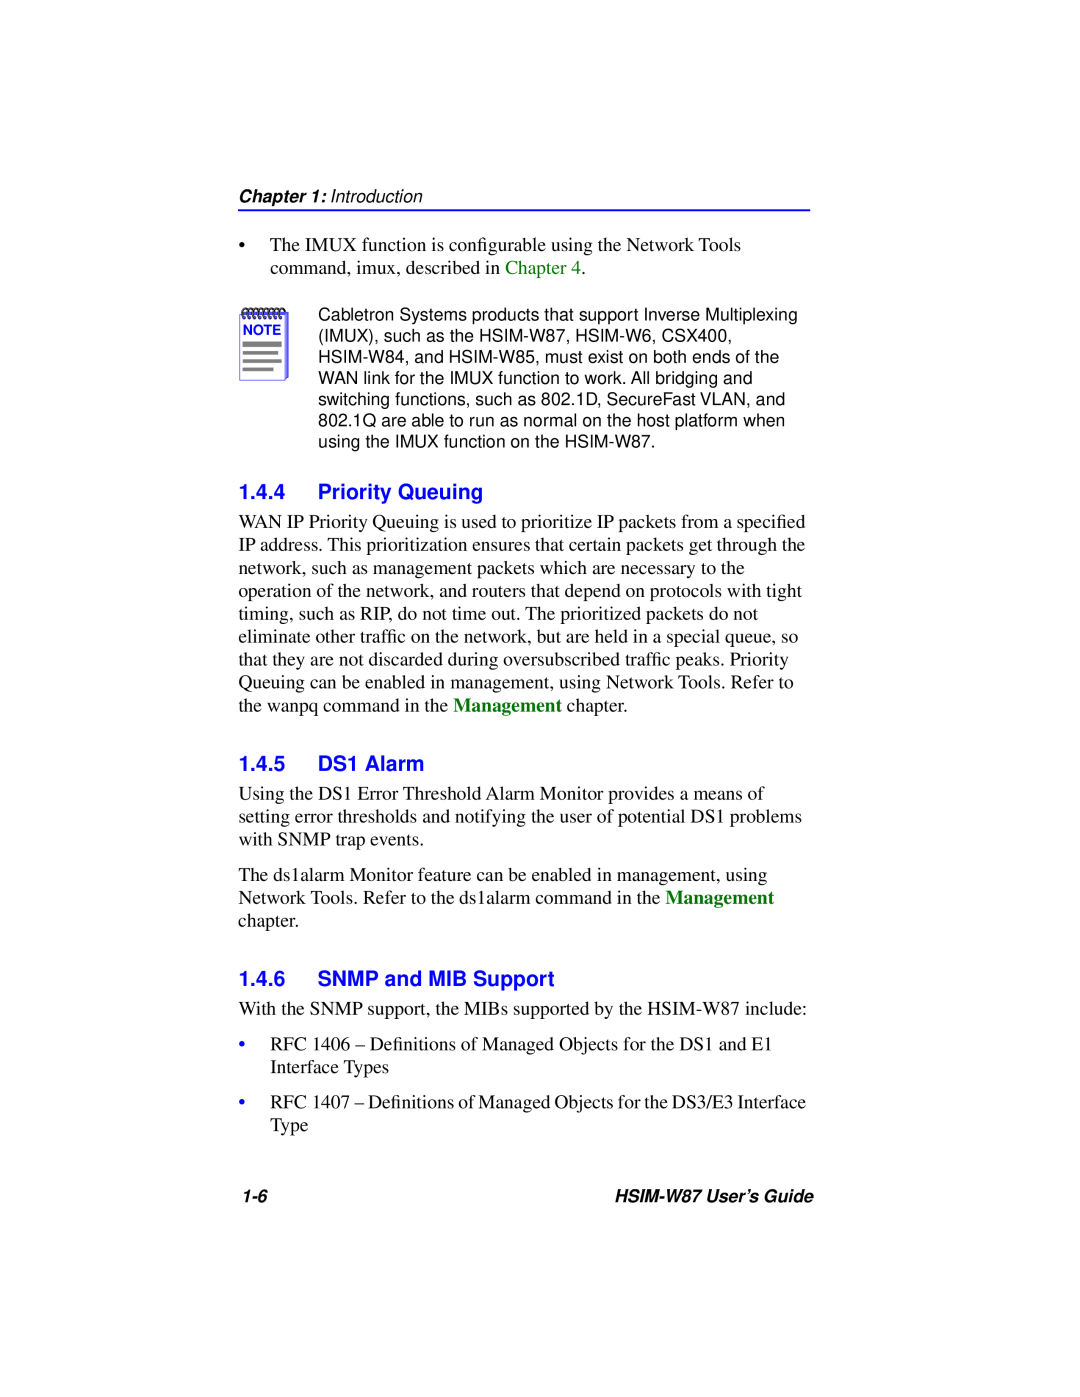 Cabletron Systems HSIM-W87 manual Priority Queuing, 1.4.5 DS1 Alarm, SNMP and MIB Support 